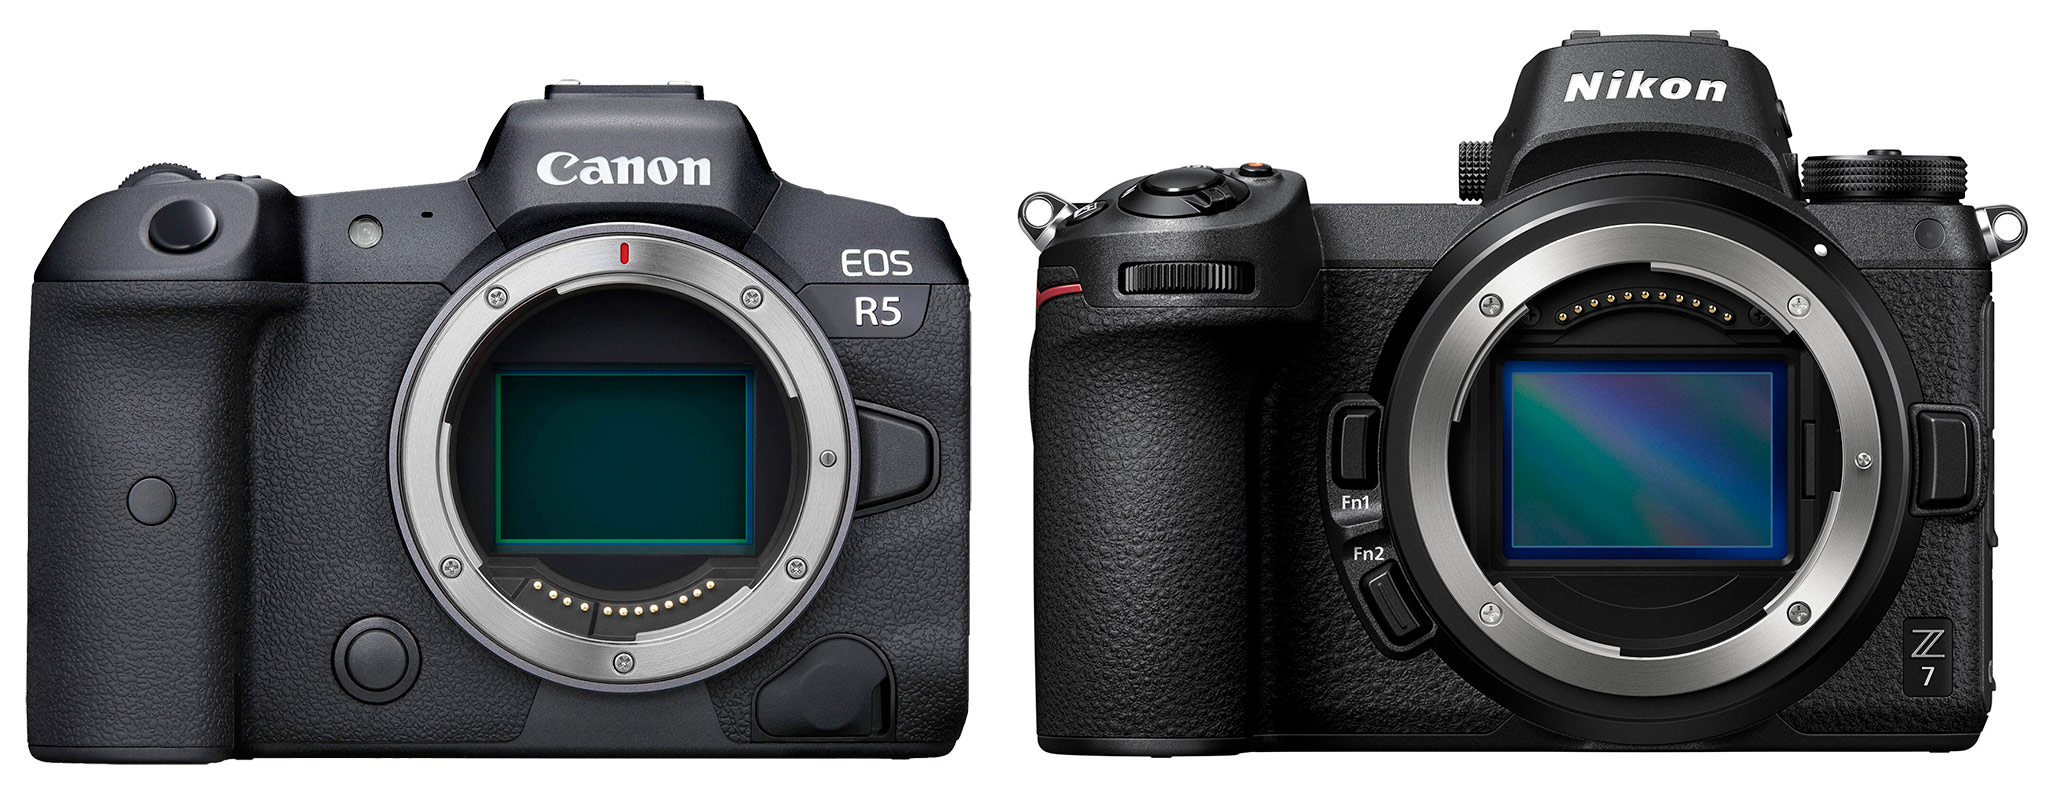 tweeling voldoende klinker Canon EOS R5 vs Nikon Z7: Which Camera is Better and Why